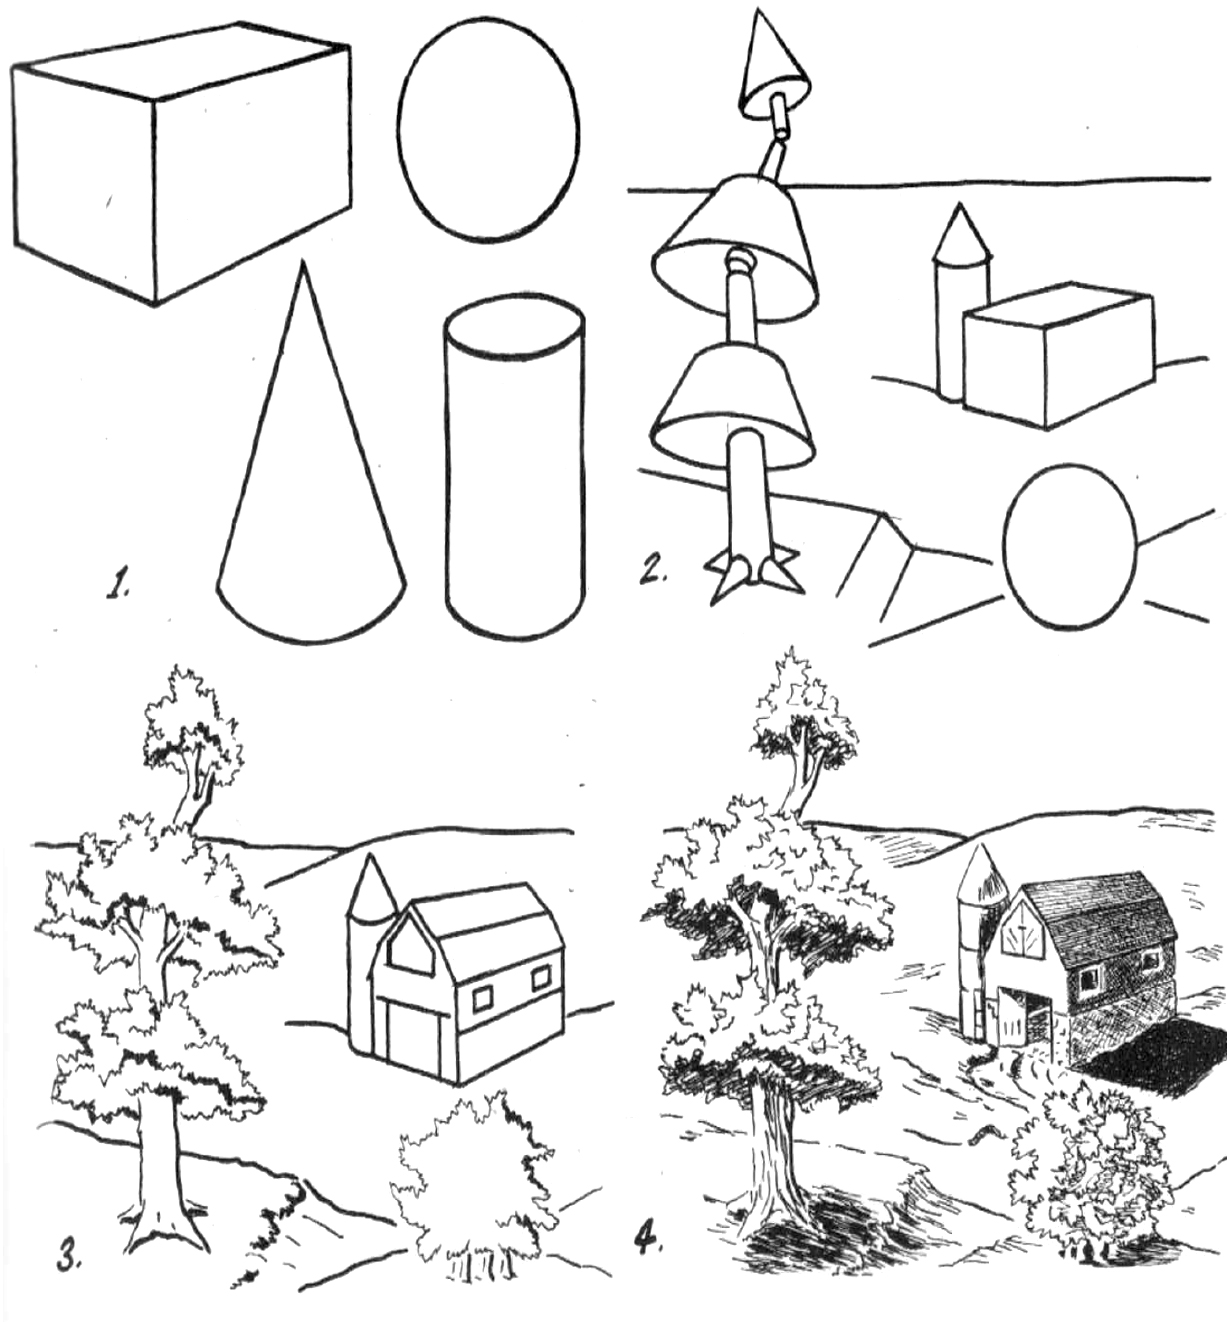 how the principles of the four basic forms-the cone, sphere, cube, and cylinder-may be applied in the creation of a simple picture